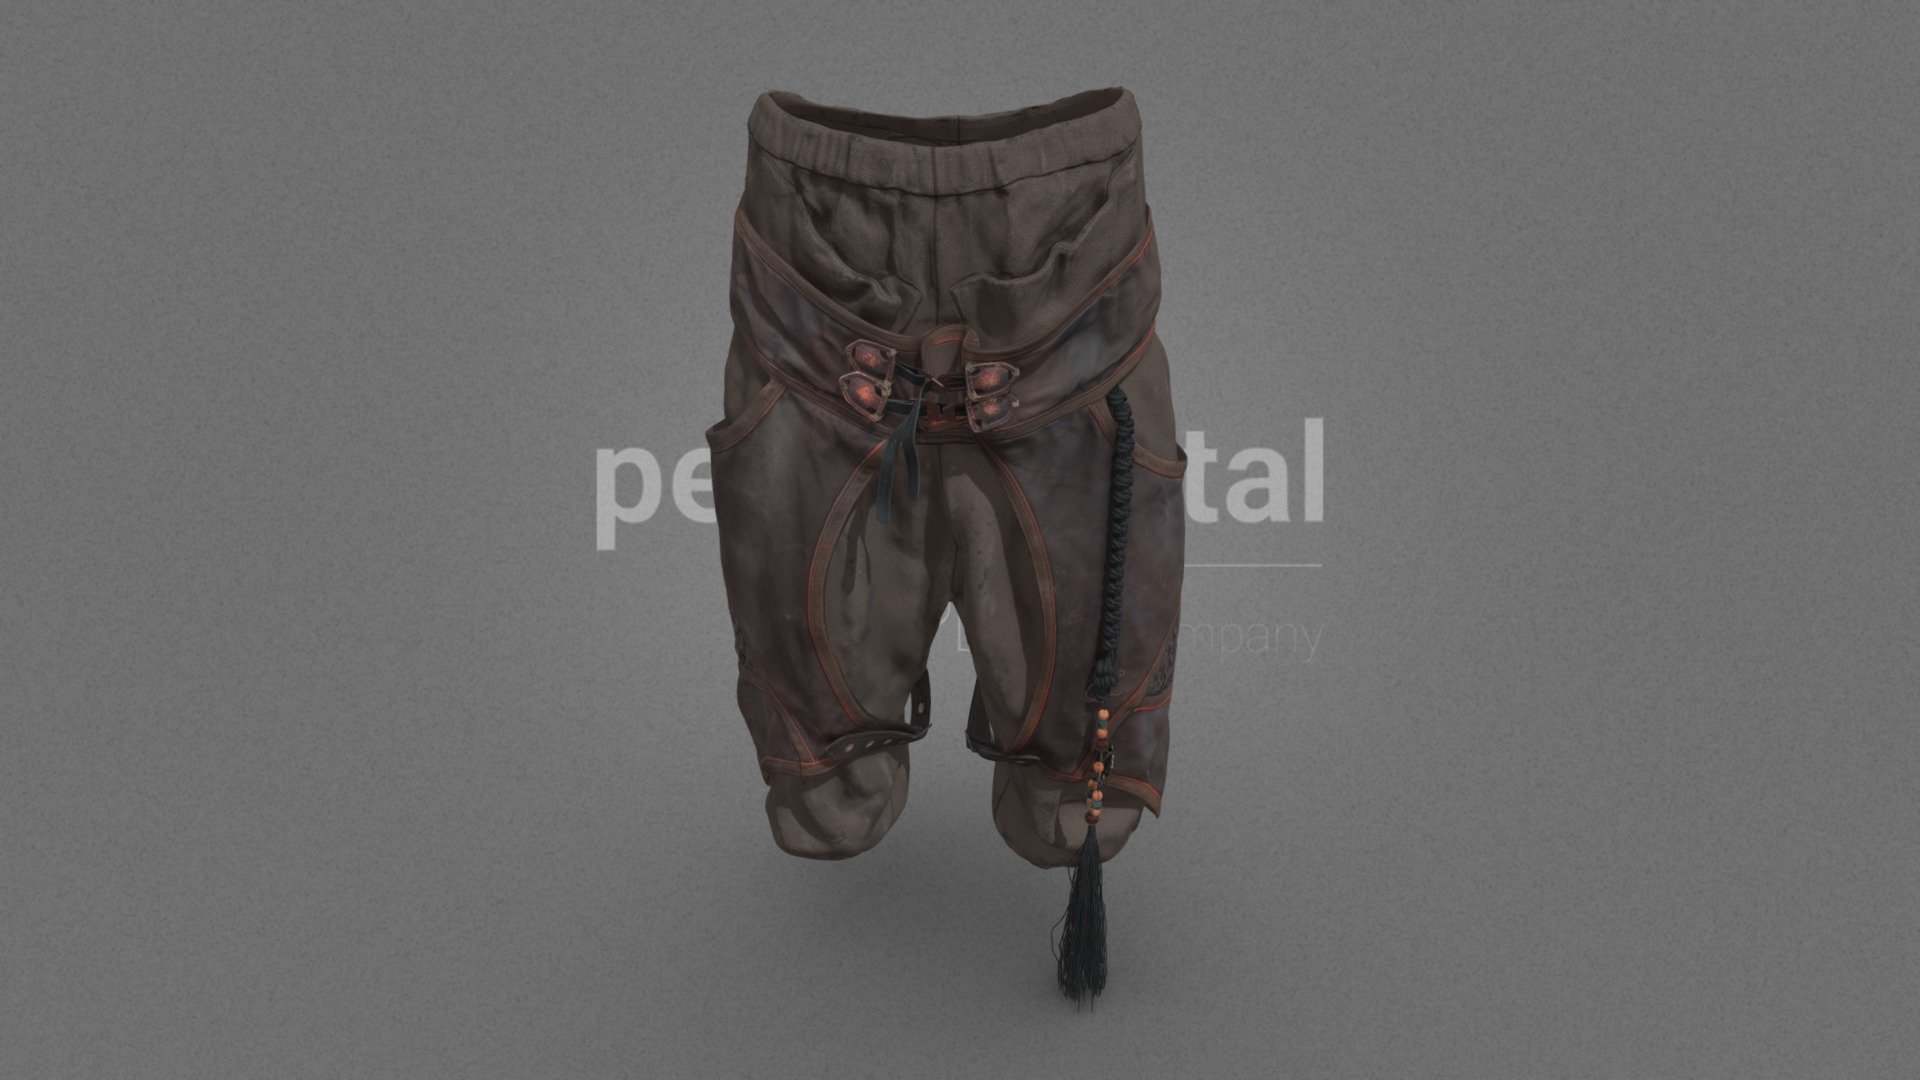 Our Wasteland Garments collection consists of several garments, which you can use in your audiovisual creations, extracted and modeled from our catalog of photogrammetry pieces.

They are optimized for use in 3D scenes of high polygonalization and optimized for rendering. We do not include characters, but they are positioned for you to include and adjust your own character. They have a model LOW (_LODRIG) inside the Blender file (included in the AdditionalFiles), which you can use for vertex weighting or cloth simulation and thus, make the transfer of vertices or property masks from the LOW to the HIGH** model.

We have included the texture maps in high resolution, as well as the Displacement maps, so you can make extreme point of view with your 3D cameras, as well as the Blender file so you can edit any aspect of the set.

Enjoy it.

Web: https://peris.digital/ - Wasteland Garments Series - Model 08 Pants - 3D model by Peris Digital (@perisdigital) 3d model